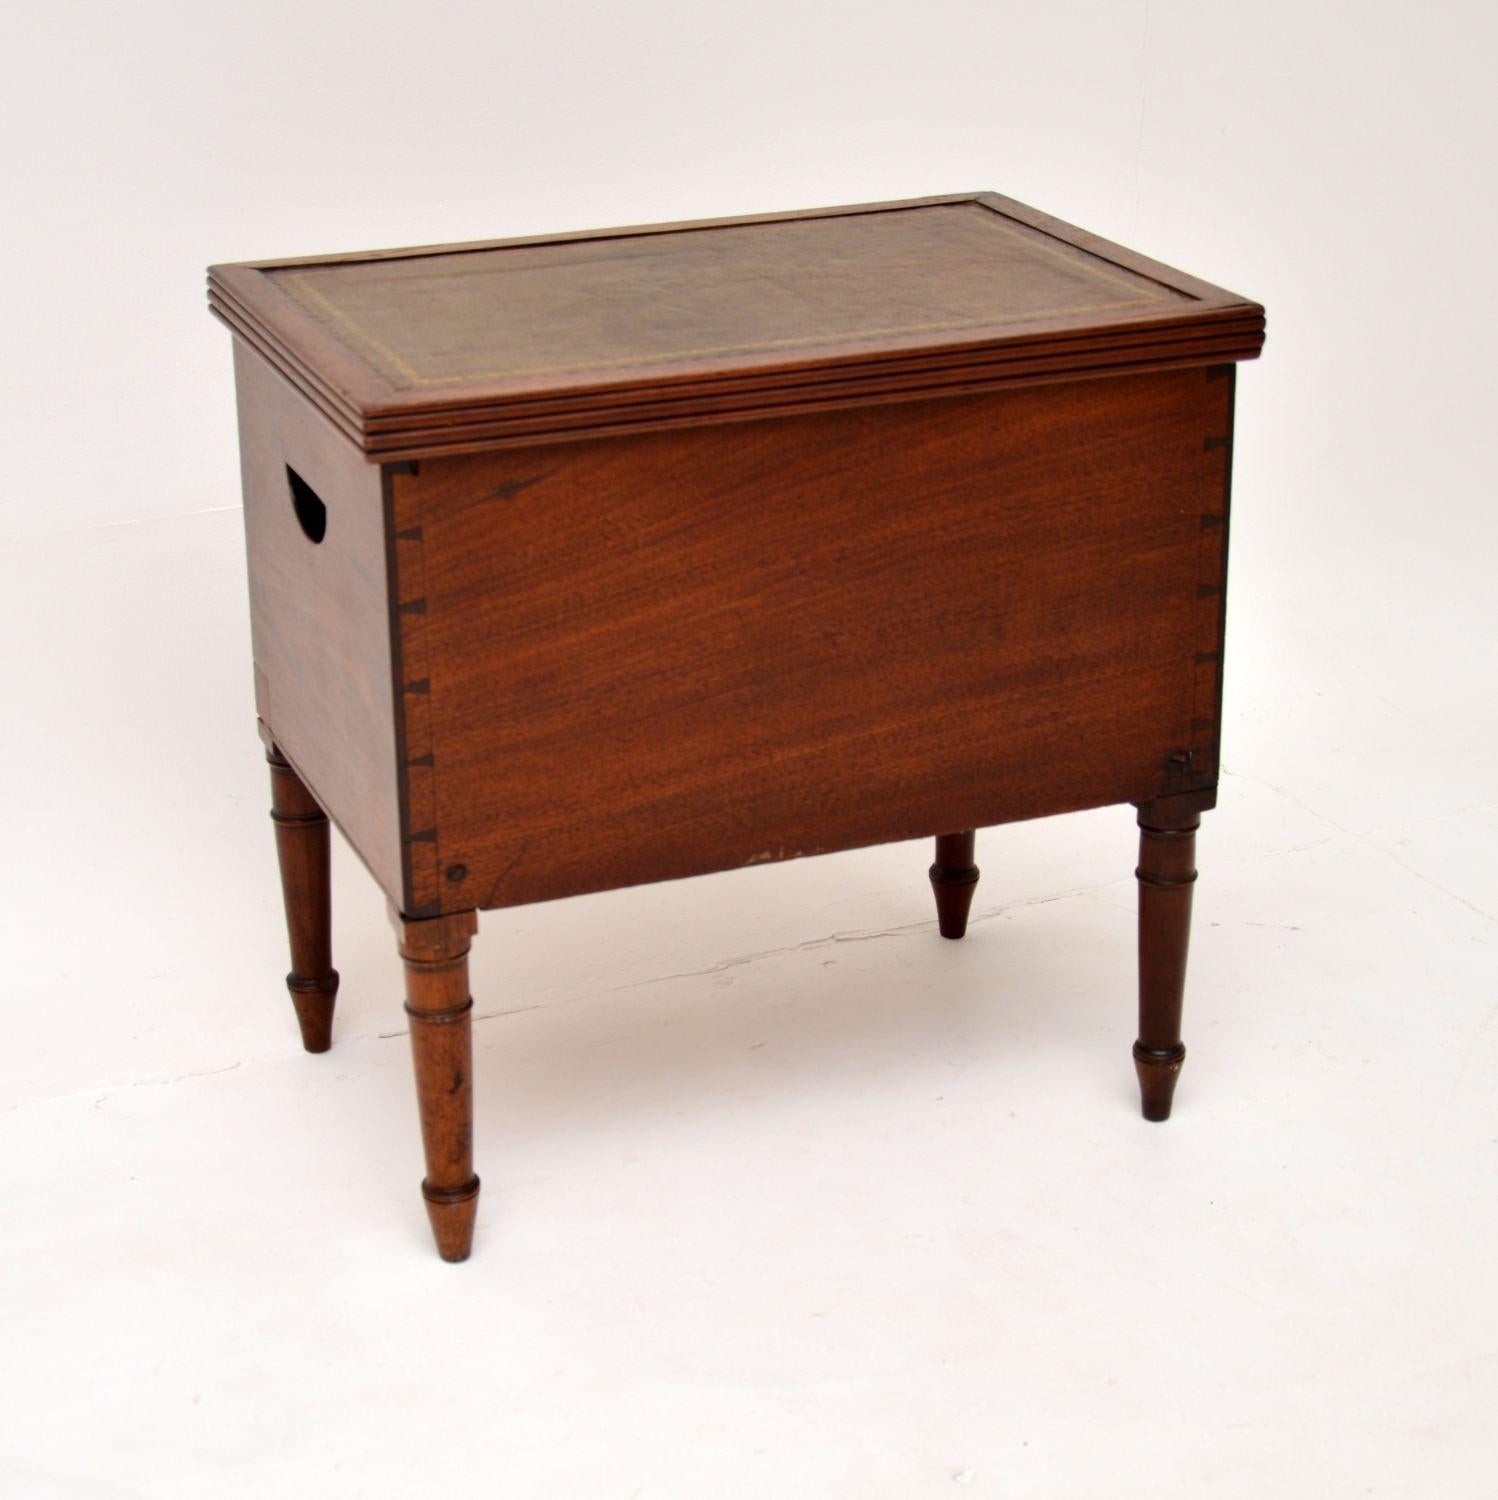 A most unusual and useful antique Georgian leather top storage box on legs. This was made in England, it dates from the 1800-1820 period.

It is beautifully made from solid wood, there is inlaid satin wood banding on the front, the back has exposed